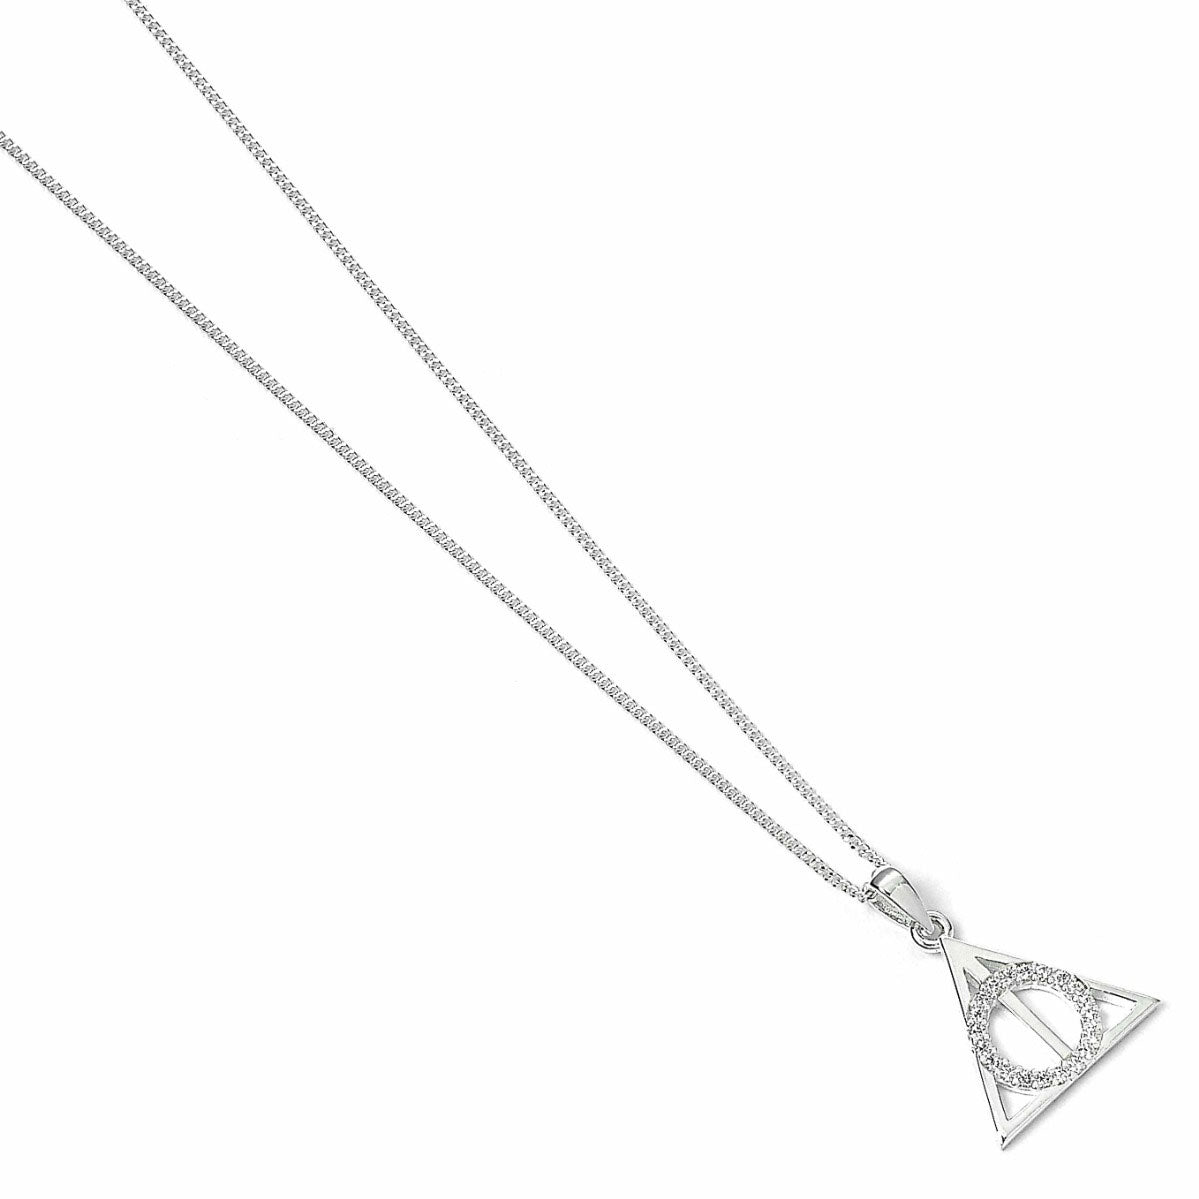 Deathly Hallows Crystal Necklace